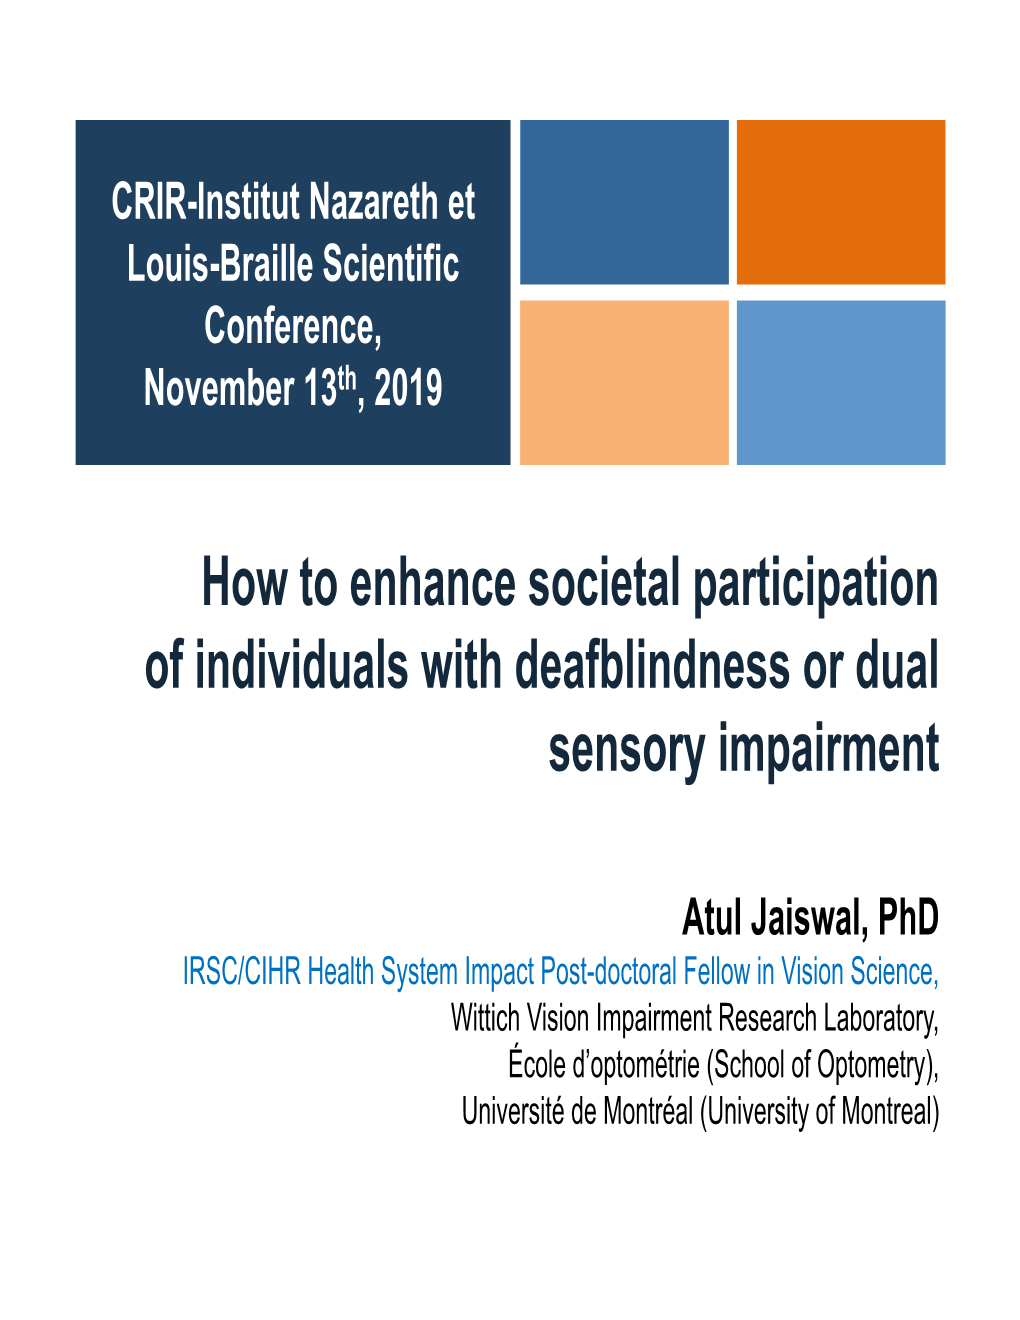 How to Enhance Societal Participation of Individuals with Deafblindness Or Dual Sensory Impairment